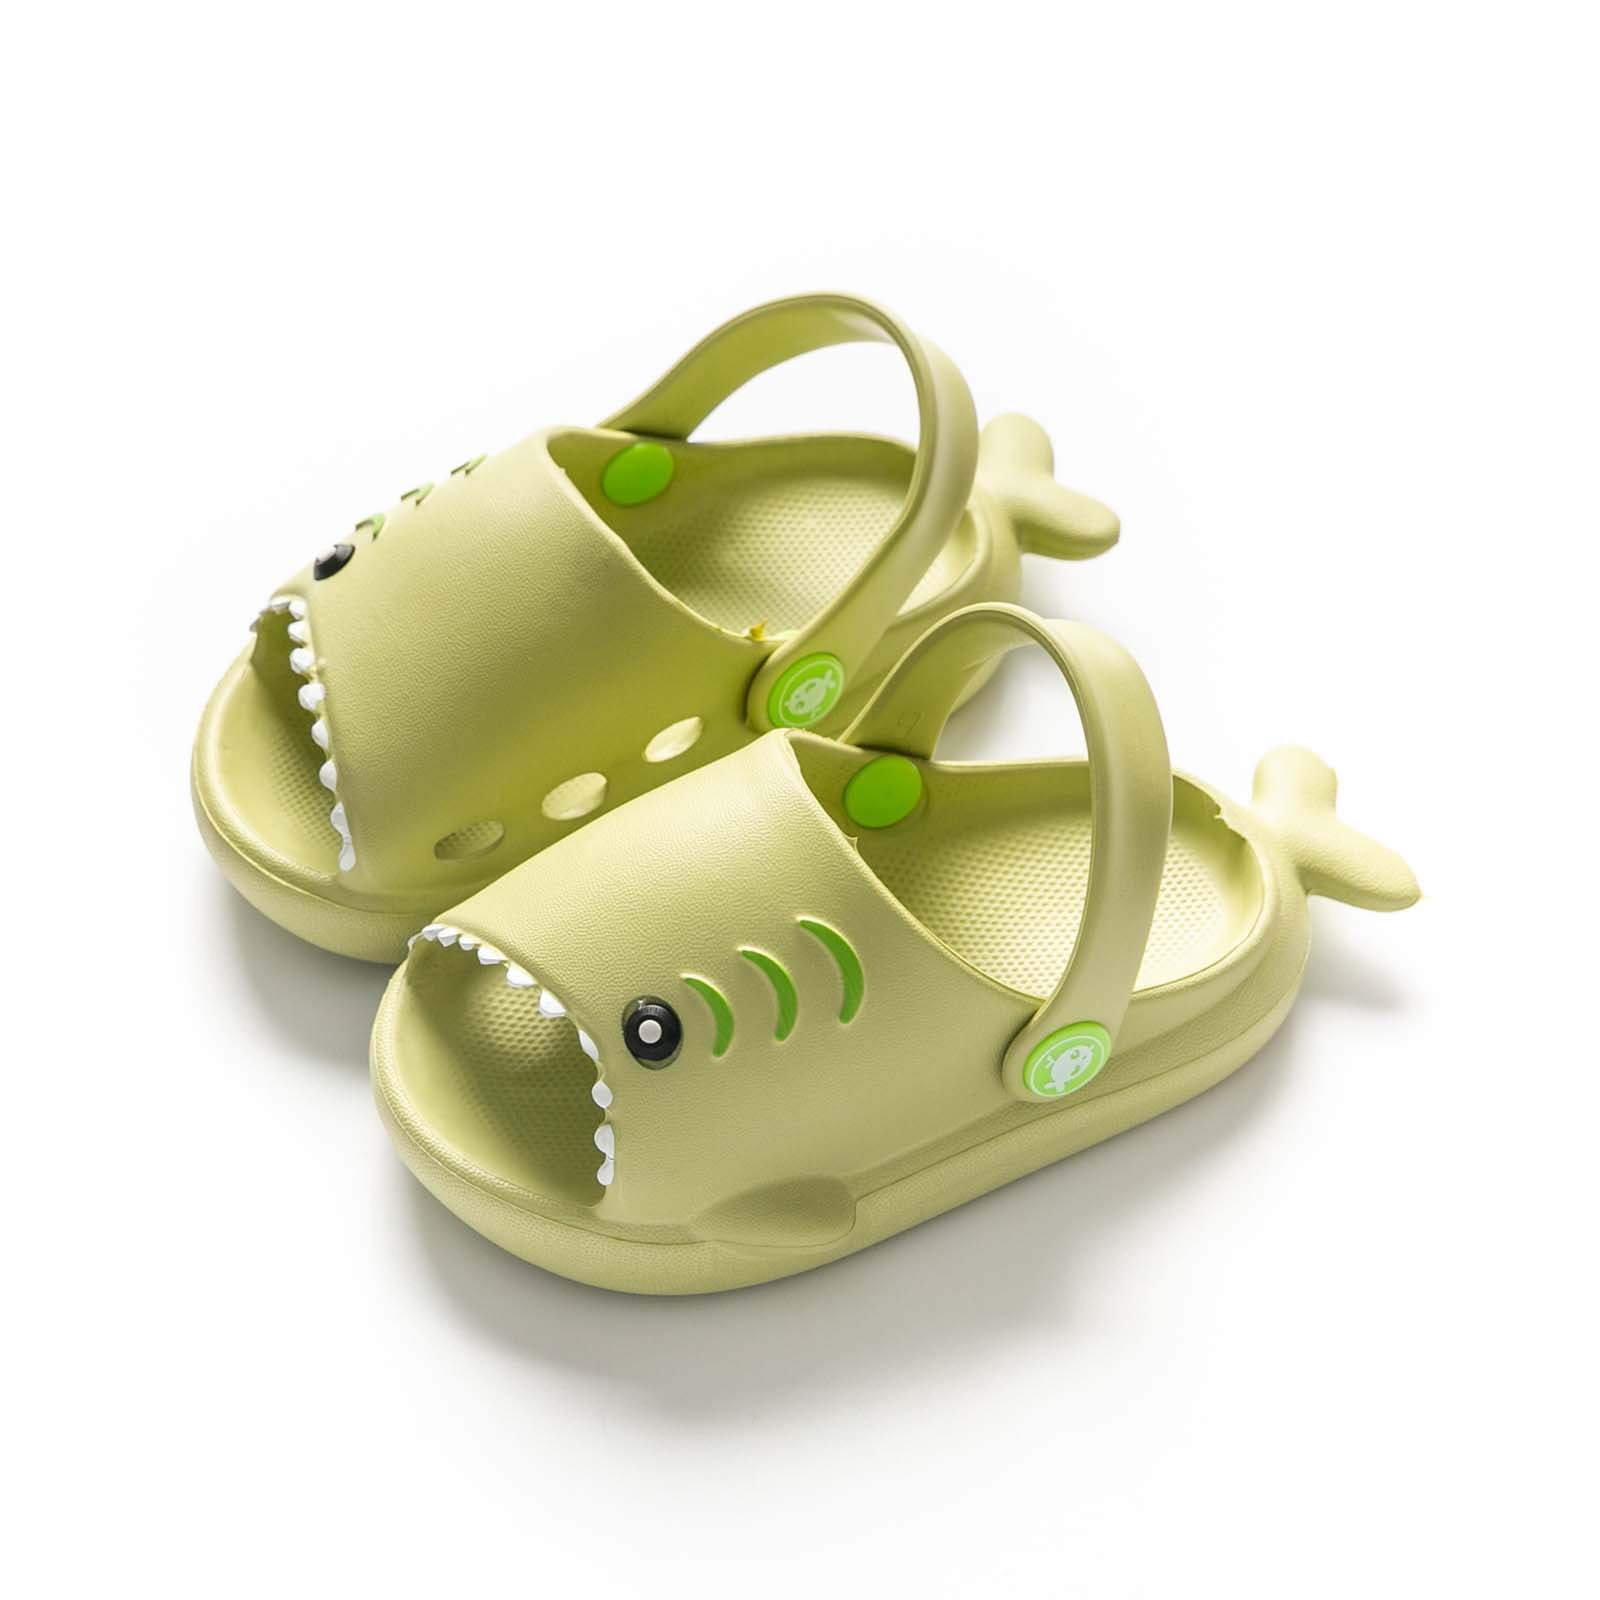 Girls Slip-on Sandals Great for Using at The Beach by The Pool or in The Garden Pick Your Colour White